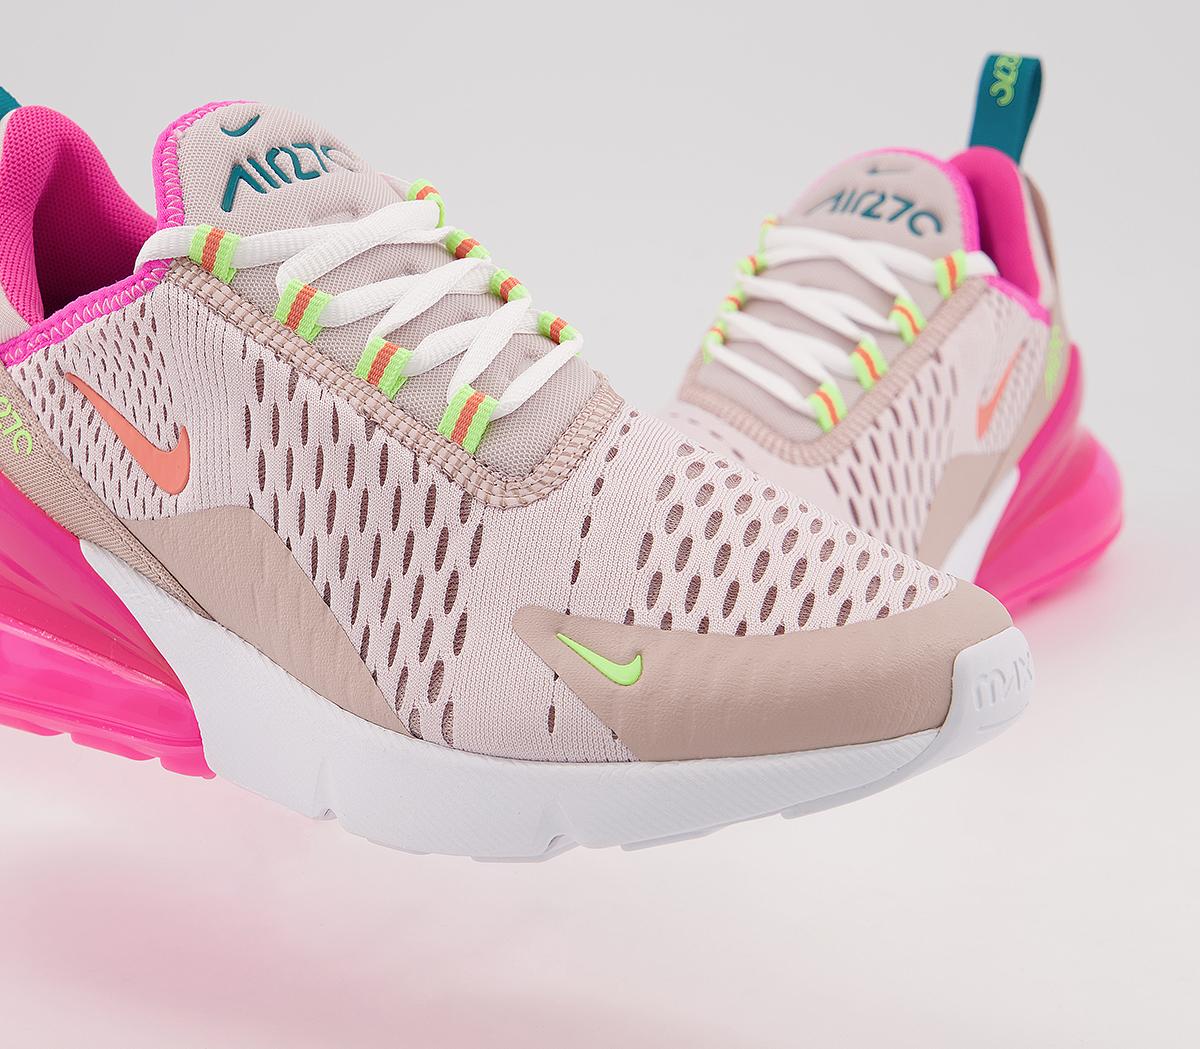 Nike Air Max 270 Trainers Barely Rose Atomic Pink - Hers trainers